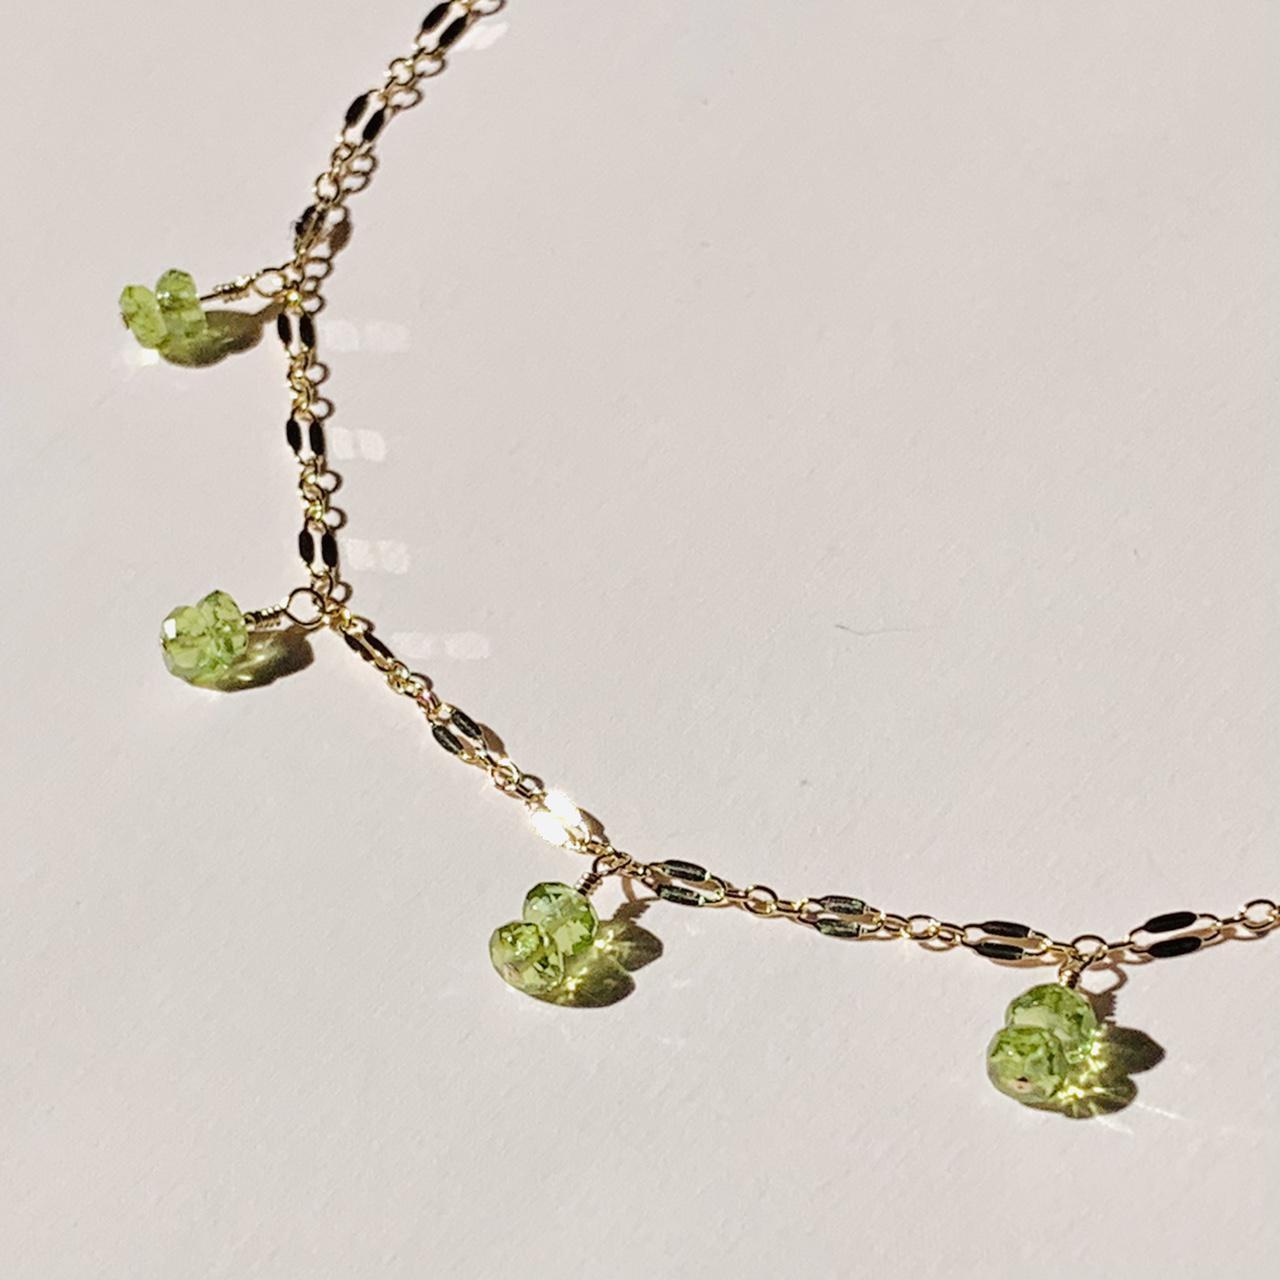 Product Image 2 - Peridot Necklace 

Material: 14K Gold